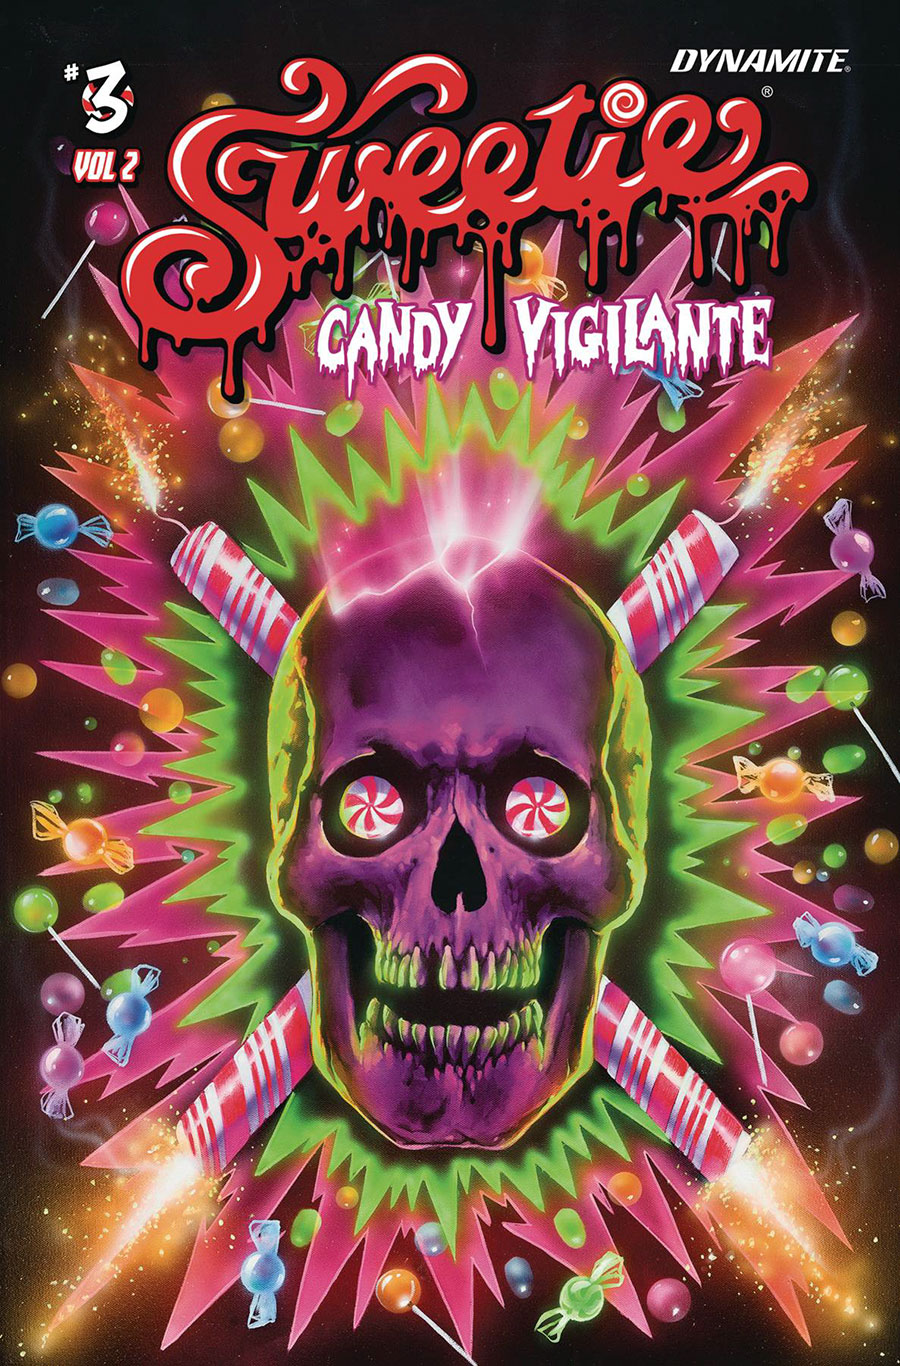 Sweetie Candy Vigilante Vol 2 #3 Cover B Variant Chad J Keith Cover